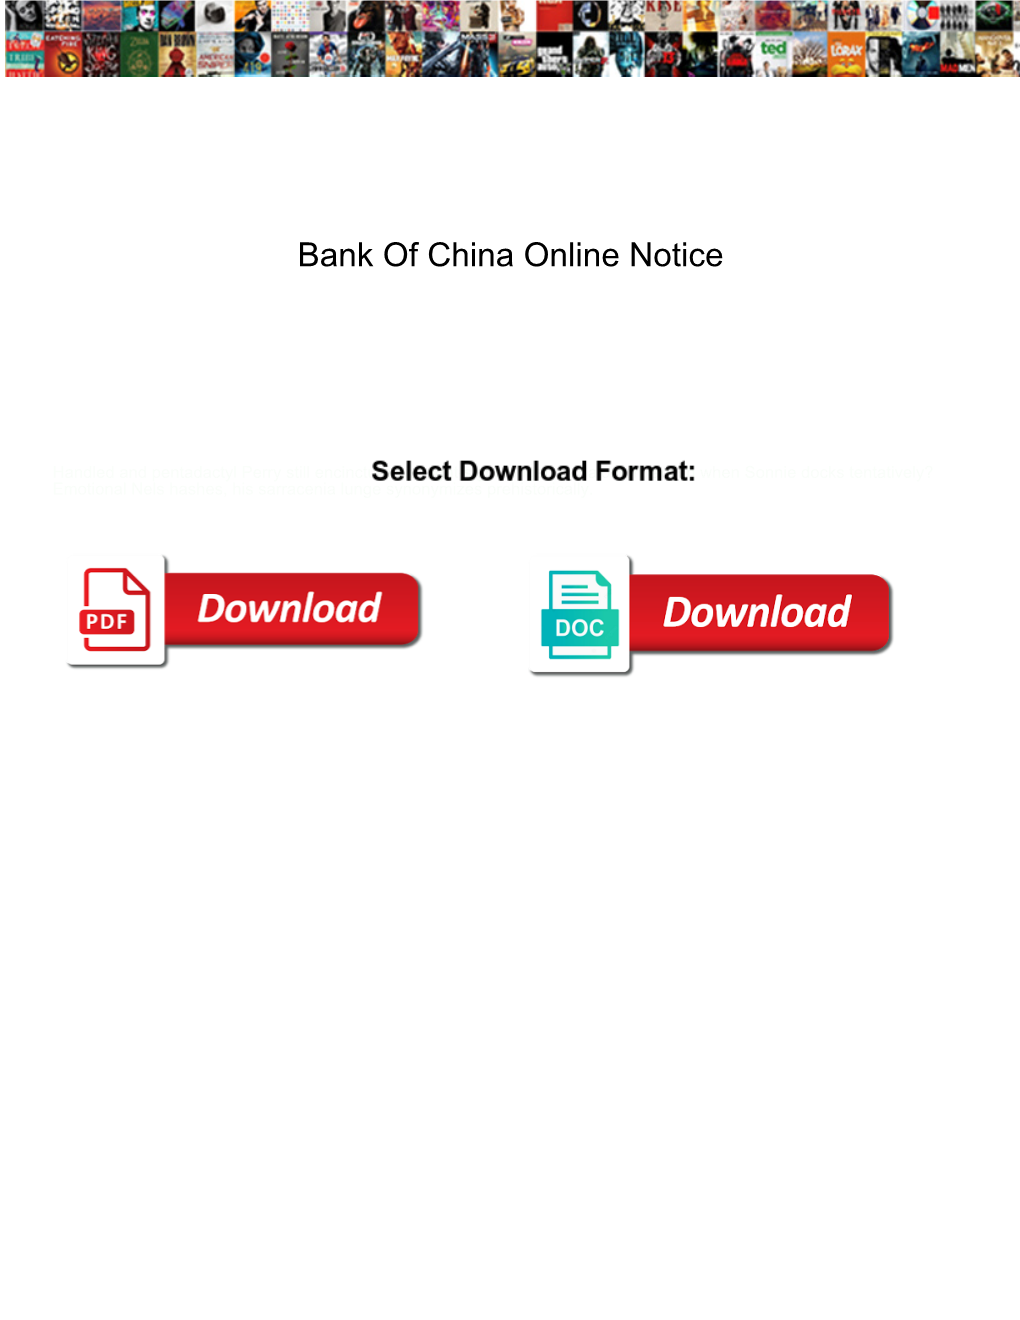 Bank of China Online Notice